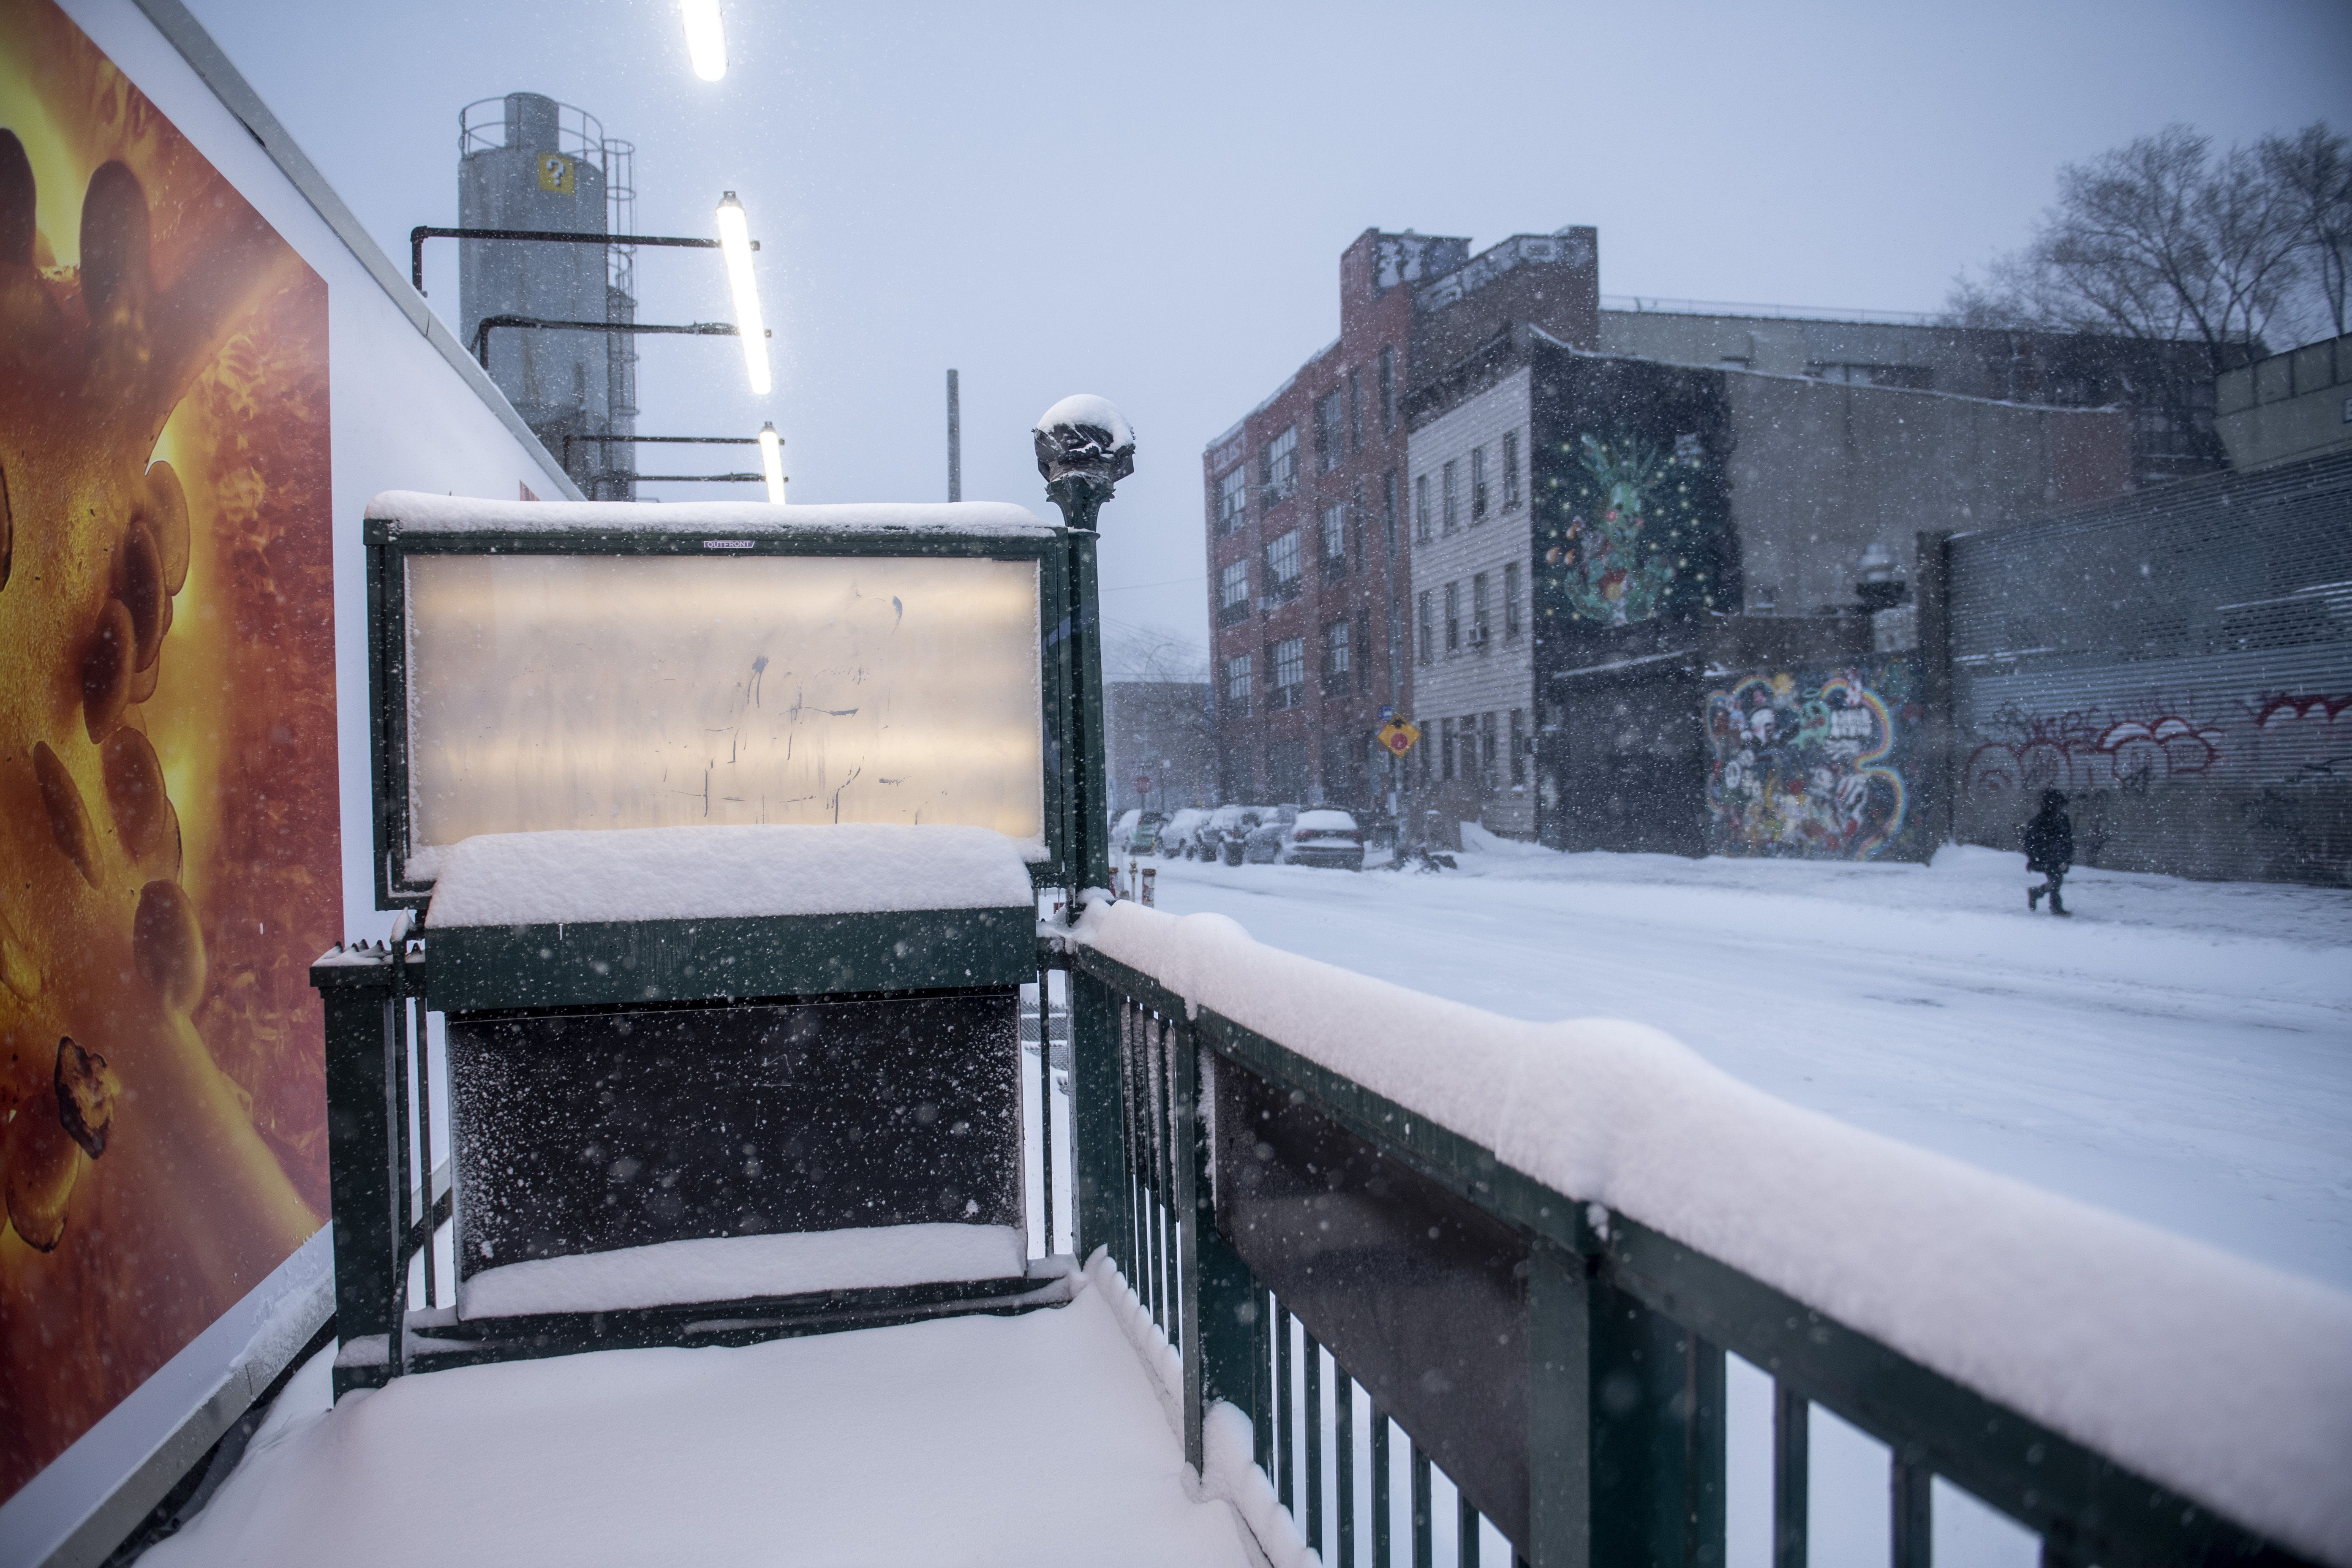 Snow covers the entrance of the subway station in the Bushwick section of the Brooklyn borough of New York on Saturday, Jan. 29, 2022.